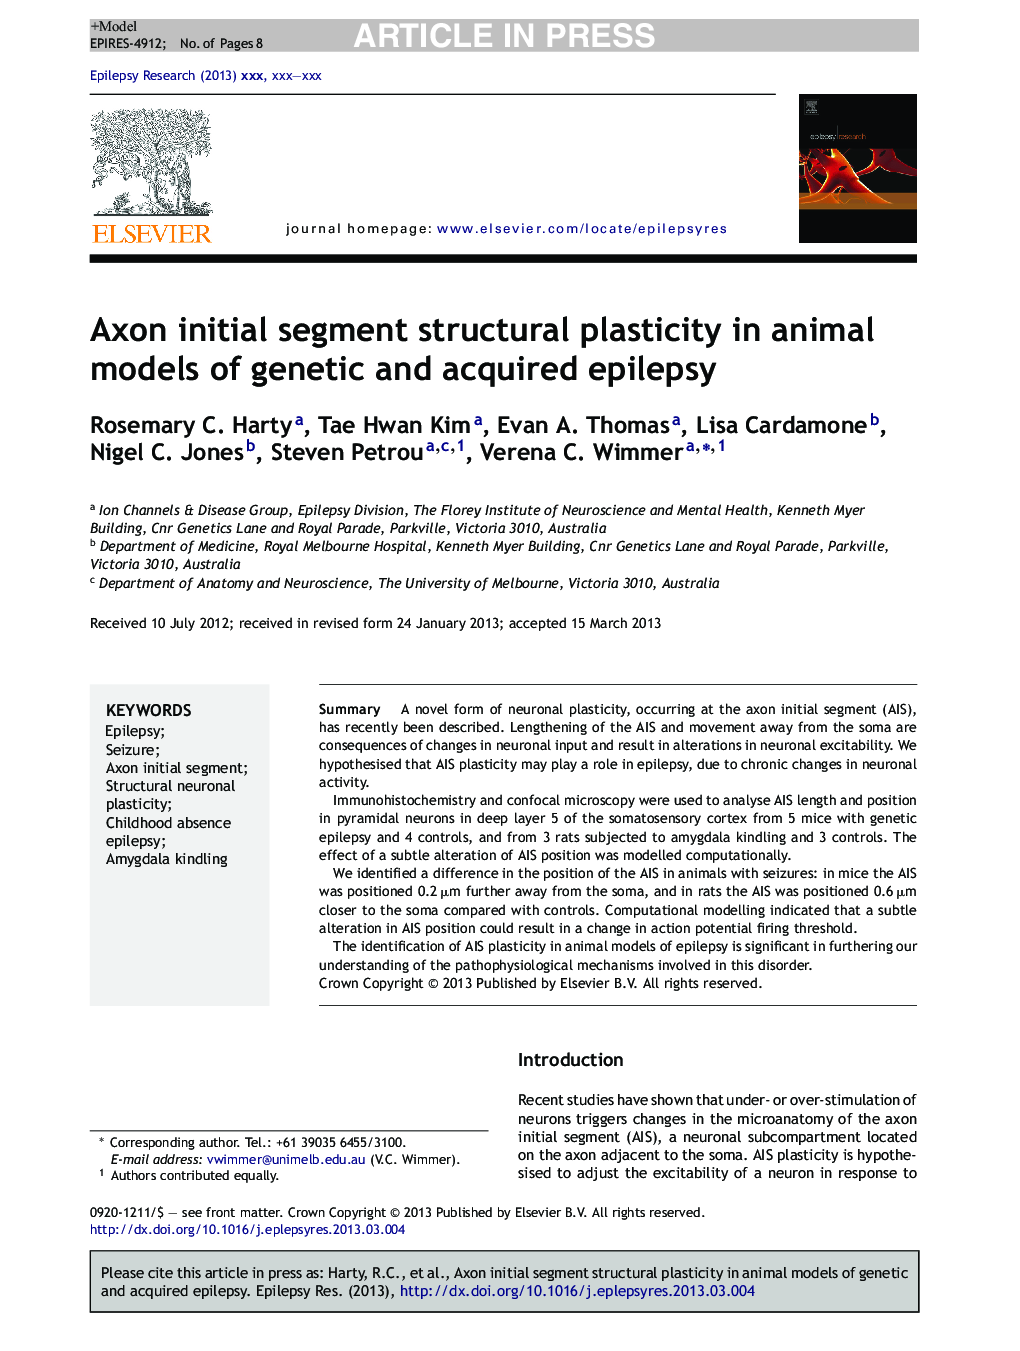 Axon initial segment structural plasticity in animal models of genetic and acquired epilepsy